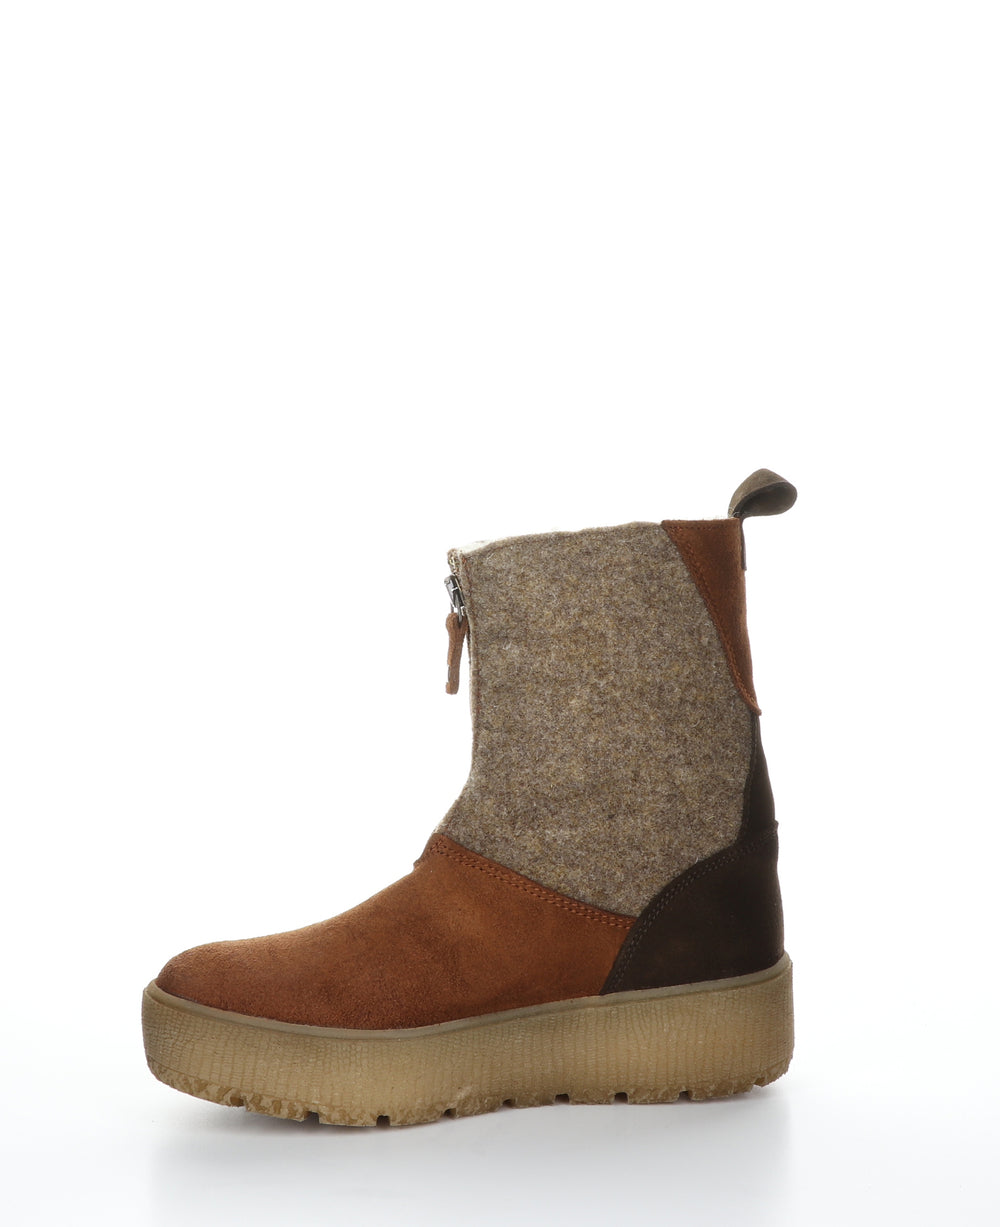 IGNITE Whisky/Beige/Coffee Zip Up Boots